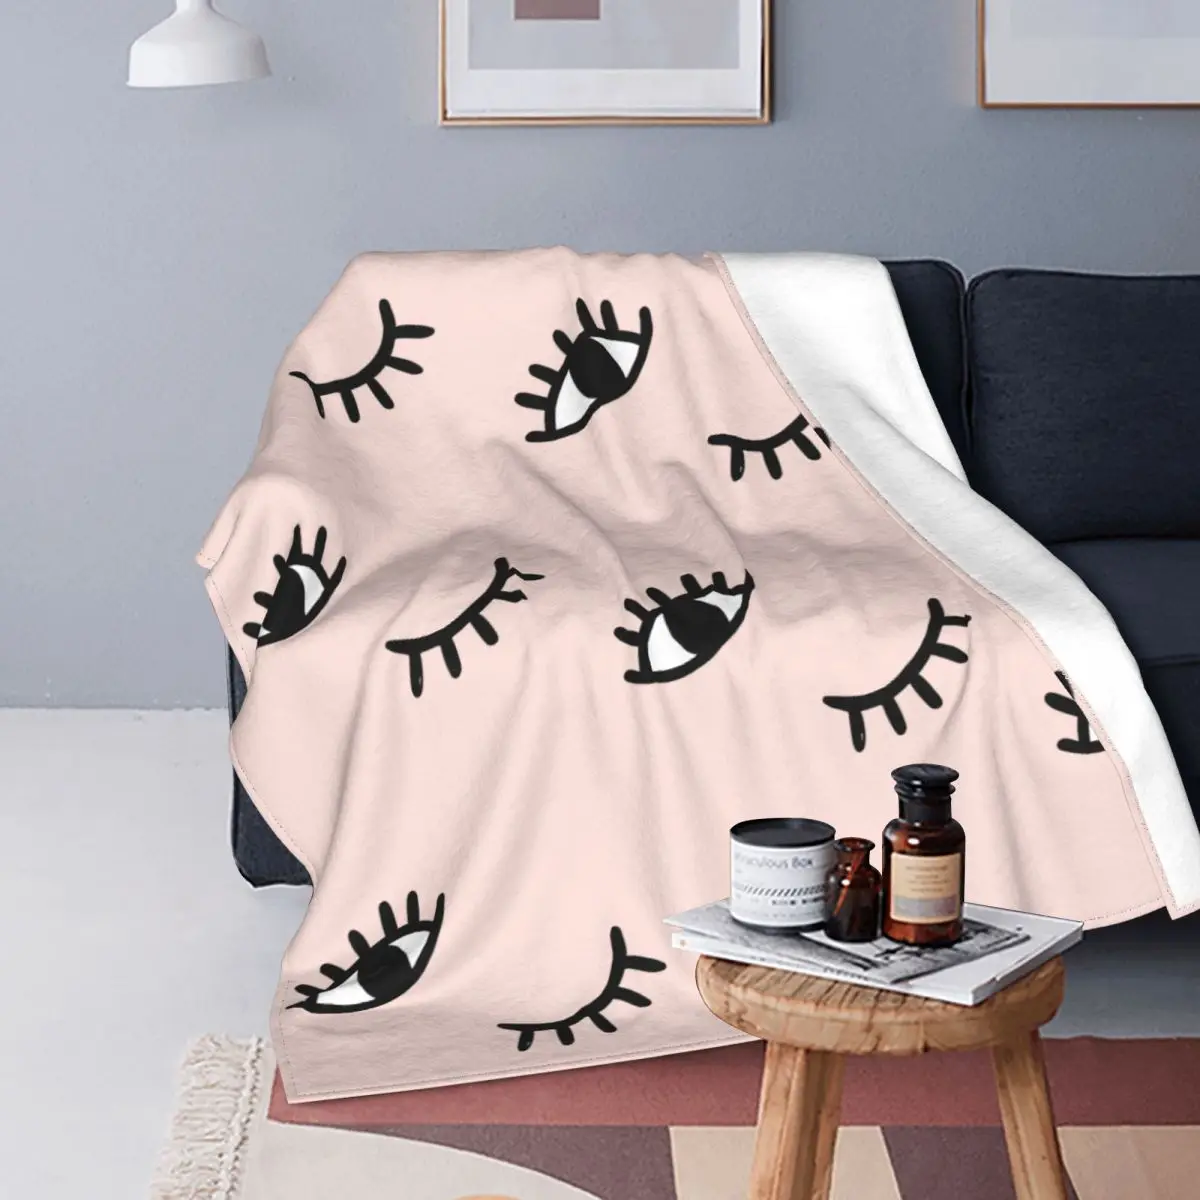 

Hand Drawn Eye Doodles Blanket Flannel Print Multi-function Lightweight Thin Throw Blanket for Bed Travel Bedding Throws